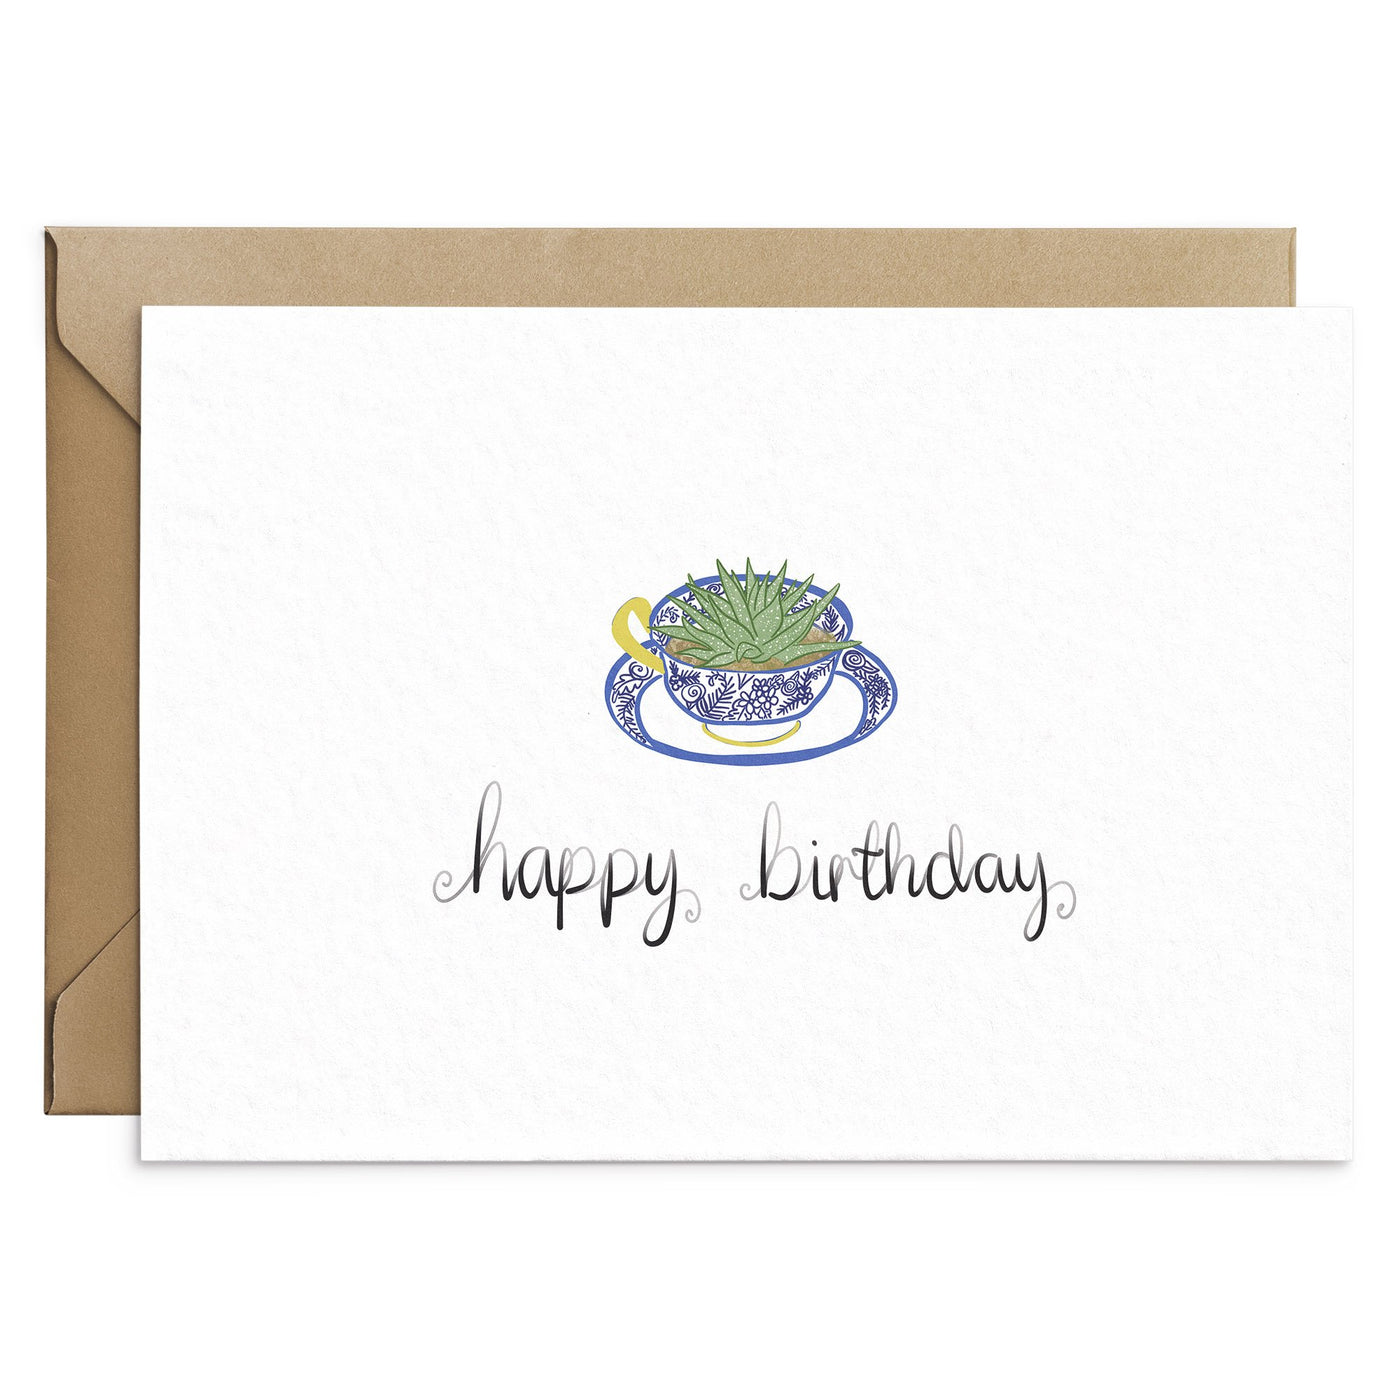 Willow Pattern Birthday Card - Poppins & Co.